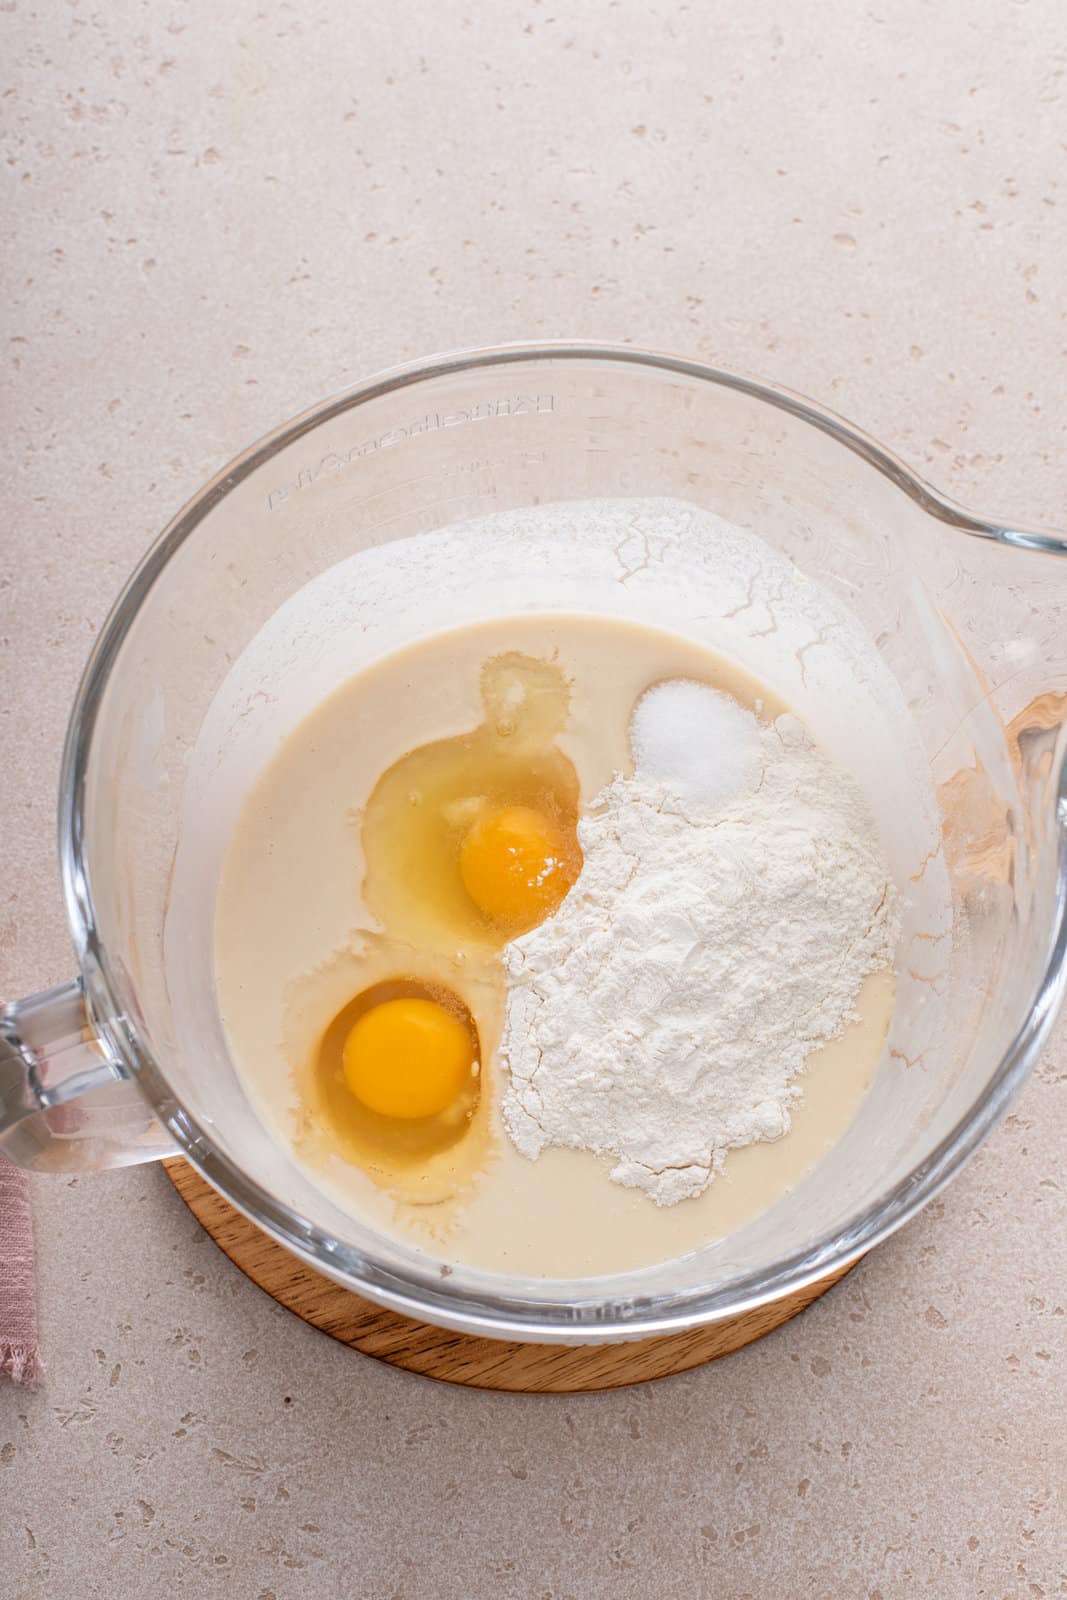 Eggs and more flour being added to roll dough base in a mixing bowl.